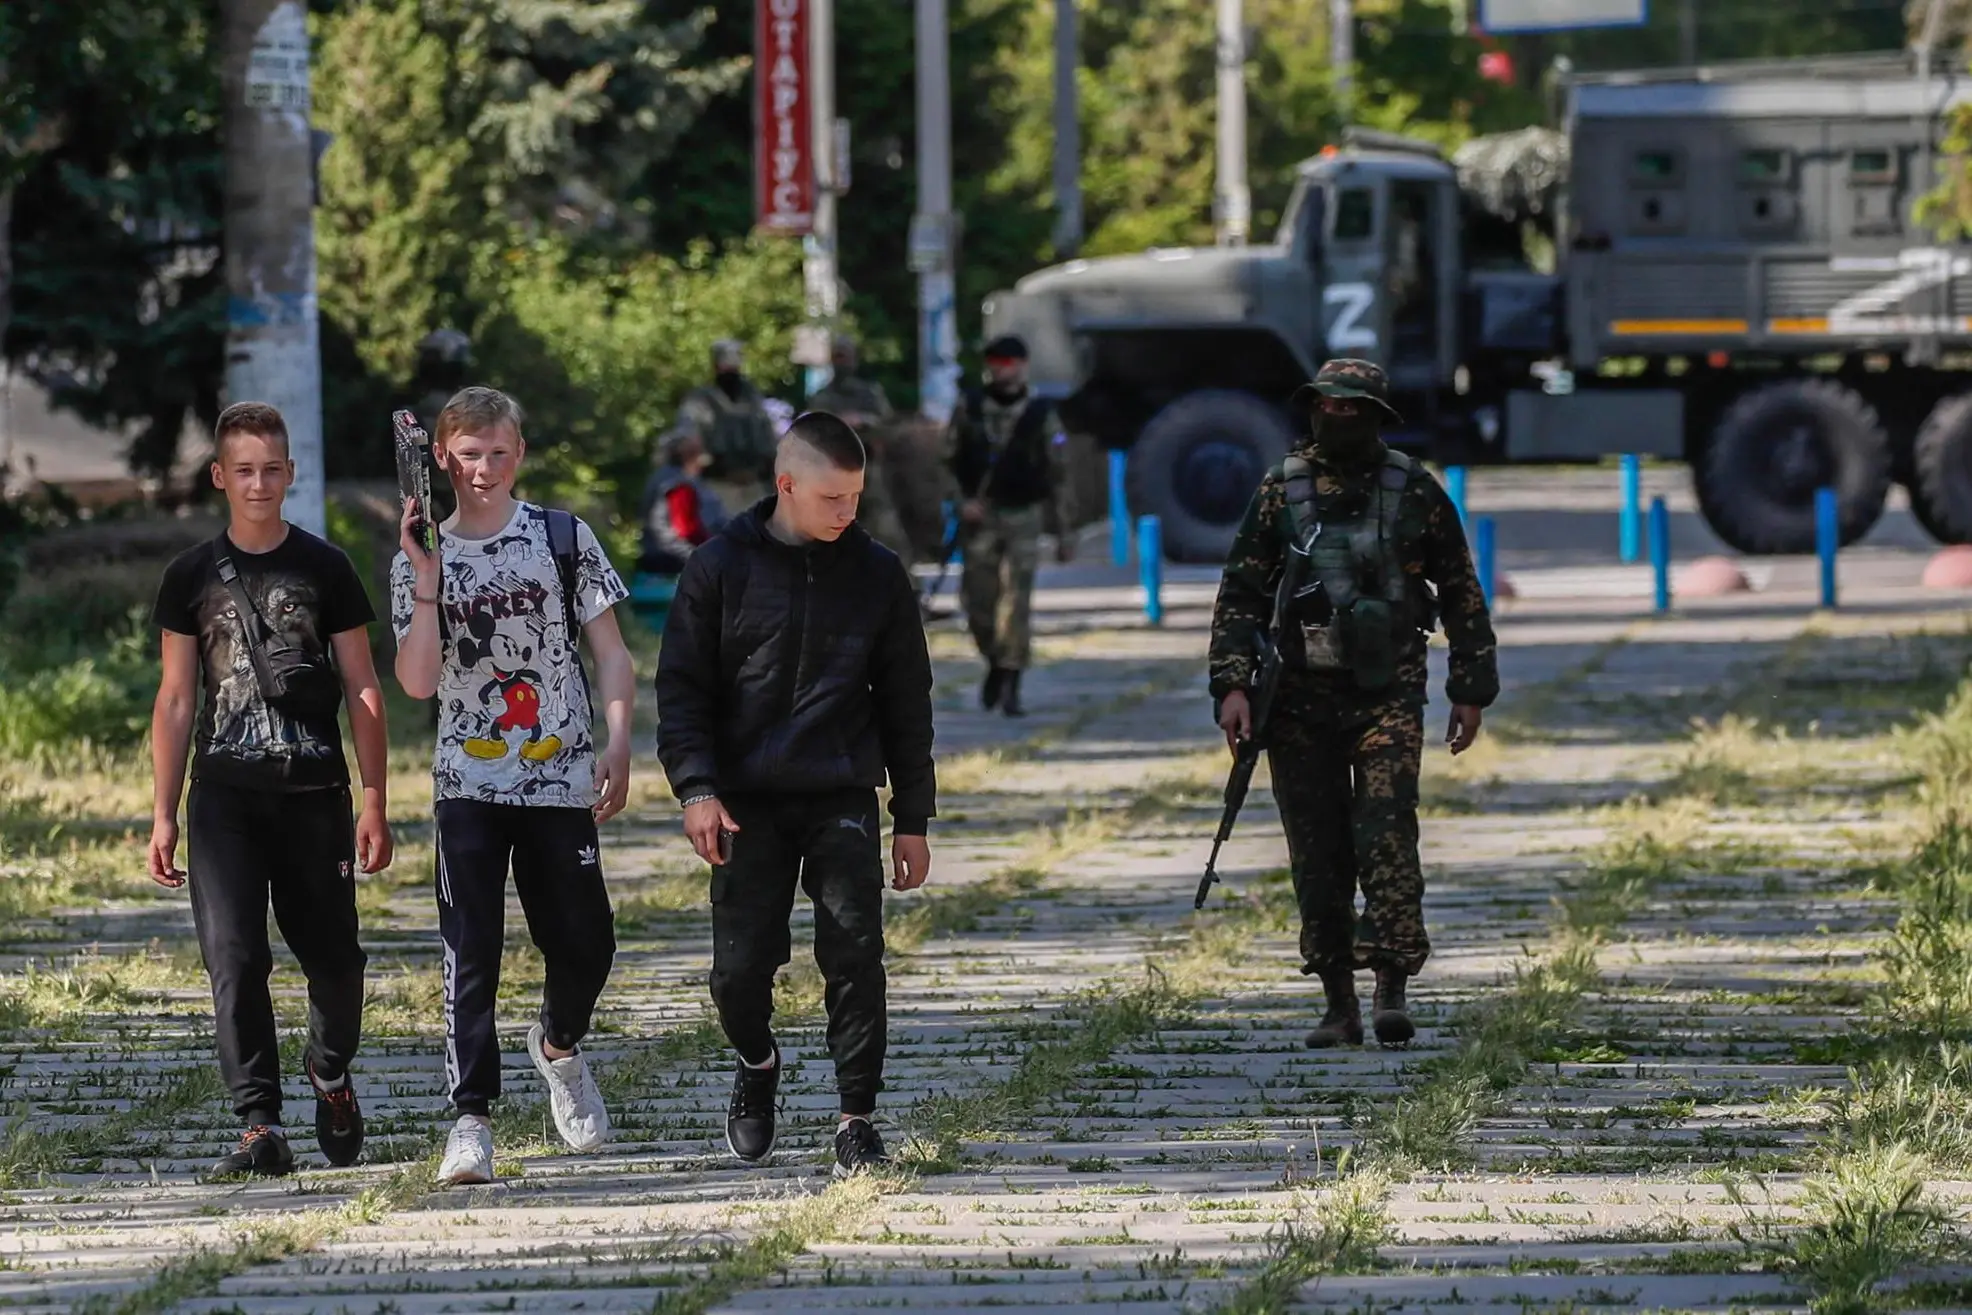 A picture taken during a media tour organized by the Russian Army shows local youths walking past a Russian serviceman in Skadovsk, Kherson region, Ukraine, 20 May 2022 (issued 21 May 2022). The Russian-appointed head of Ukraine's Kherson region, Volodymyr Saldo, said that the area will 'soon become part of the Russian Federation'. The governor was installed by Russian forces after they took control of the southern Ukrainian region in March 2022. ANSA/SERGEI ILNITSKY